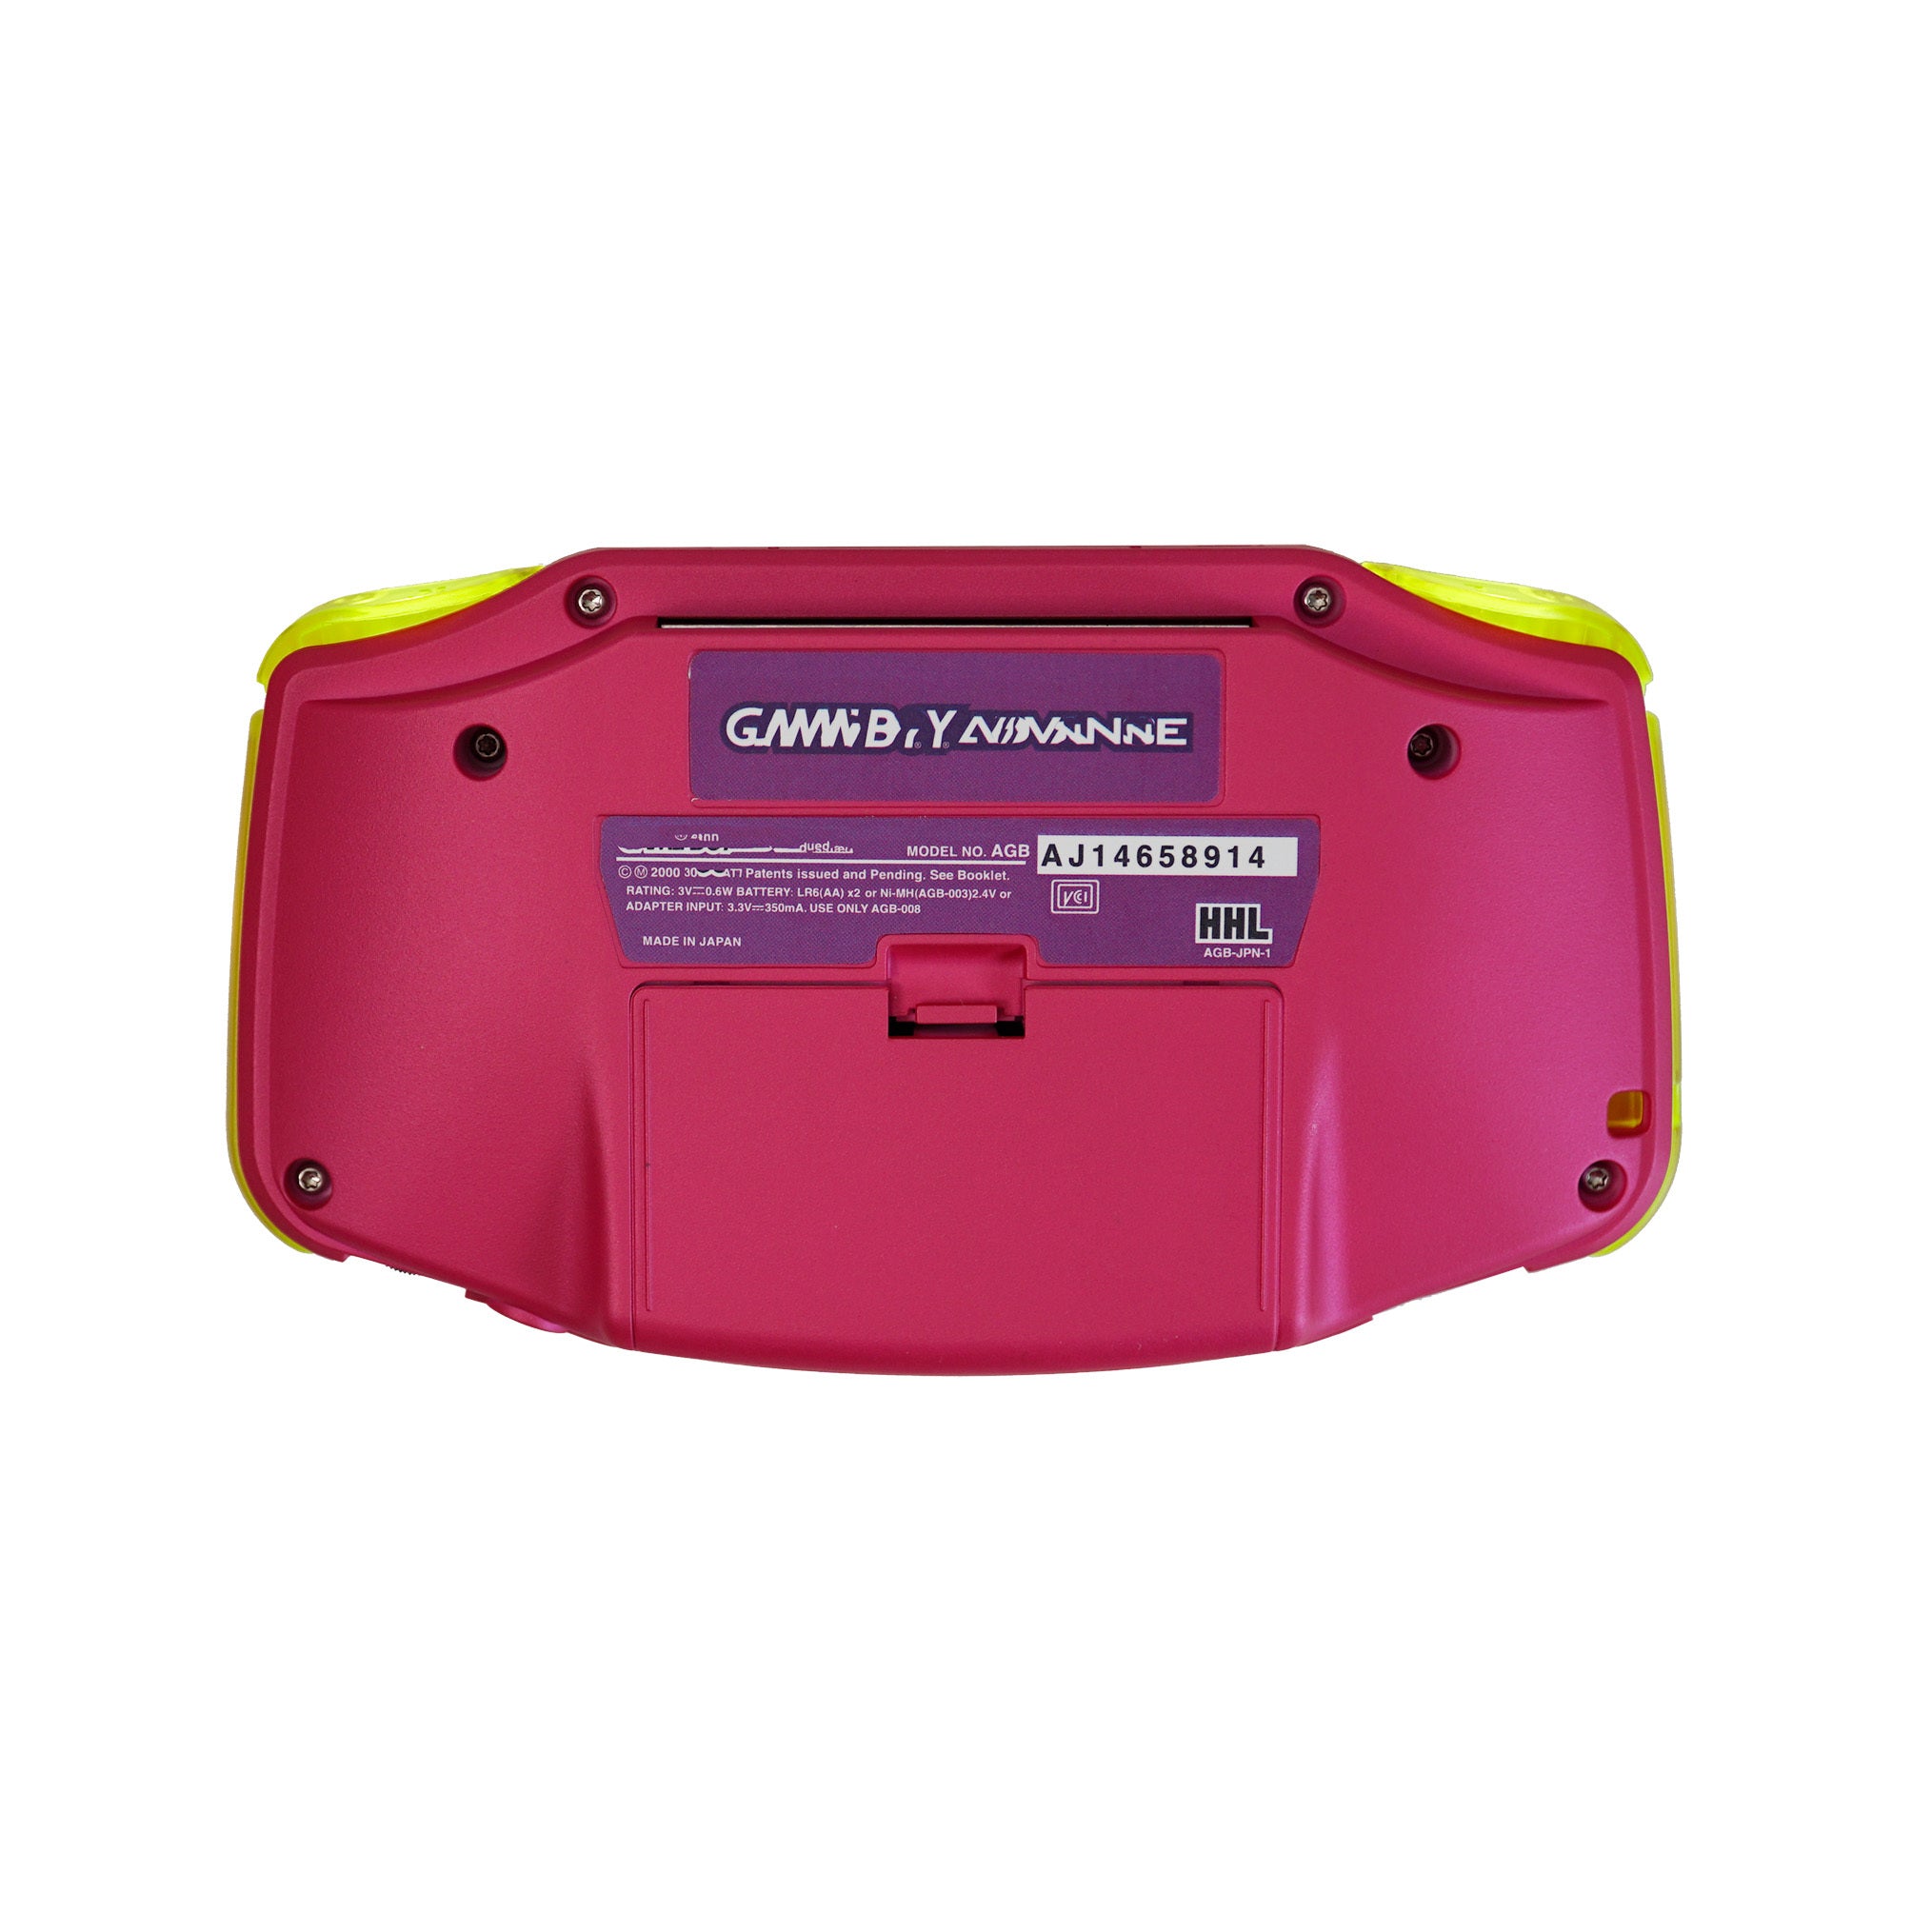 Made to Order Game Boy Advance Ultimate Console - Let's Go Party | IPS & LED UPGRADE ONLY Hand Held Legend